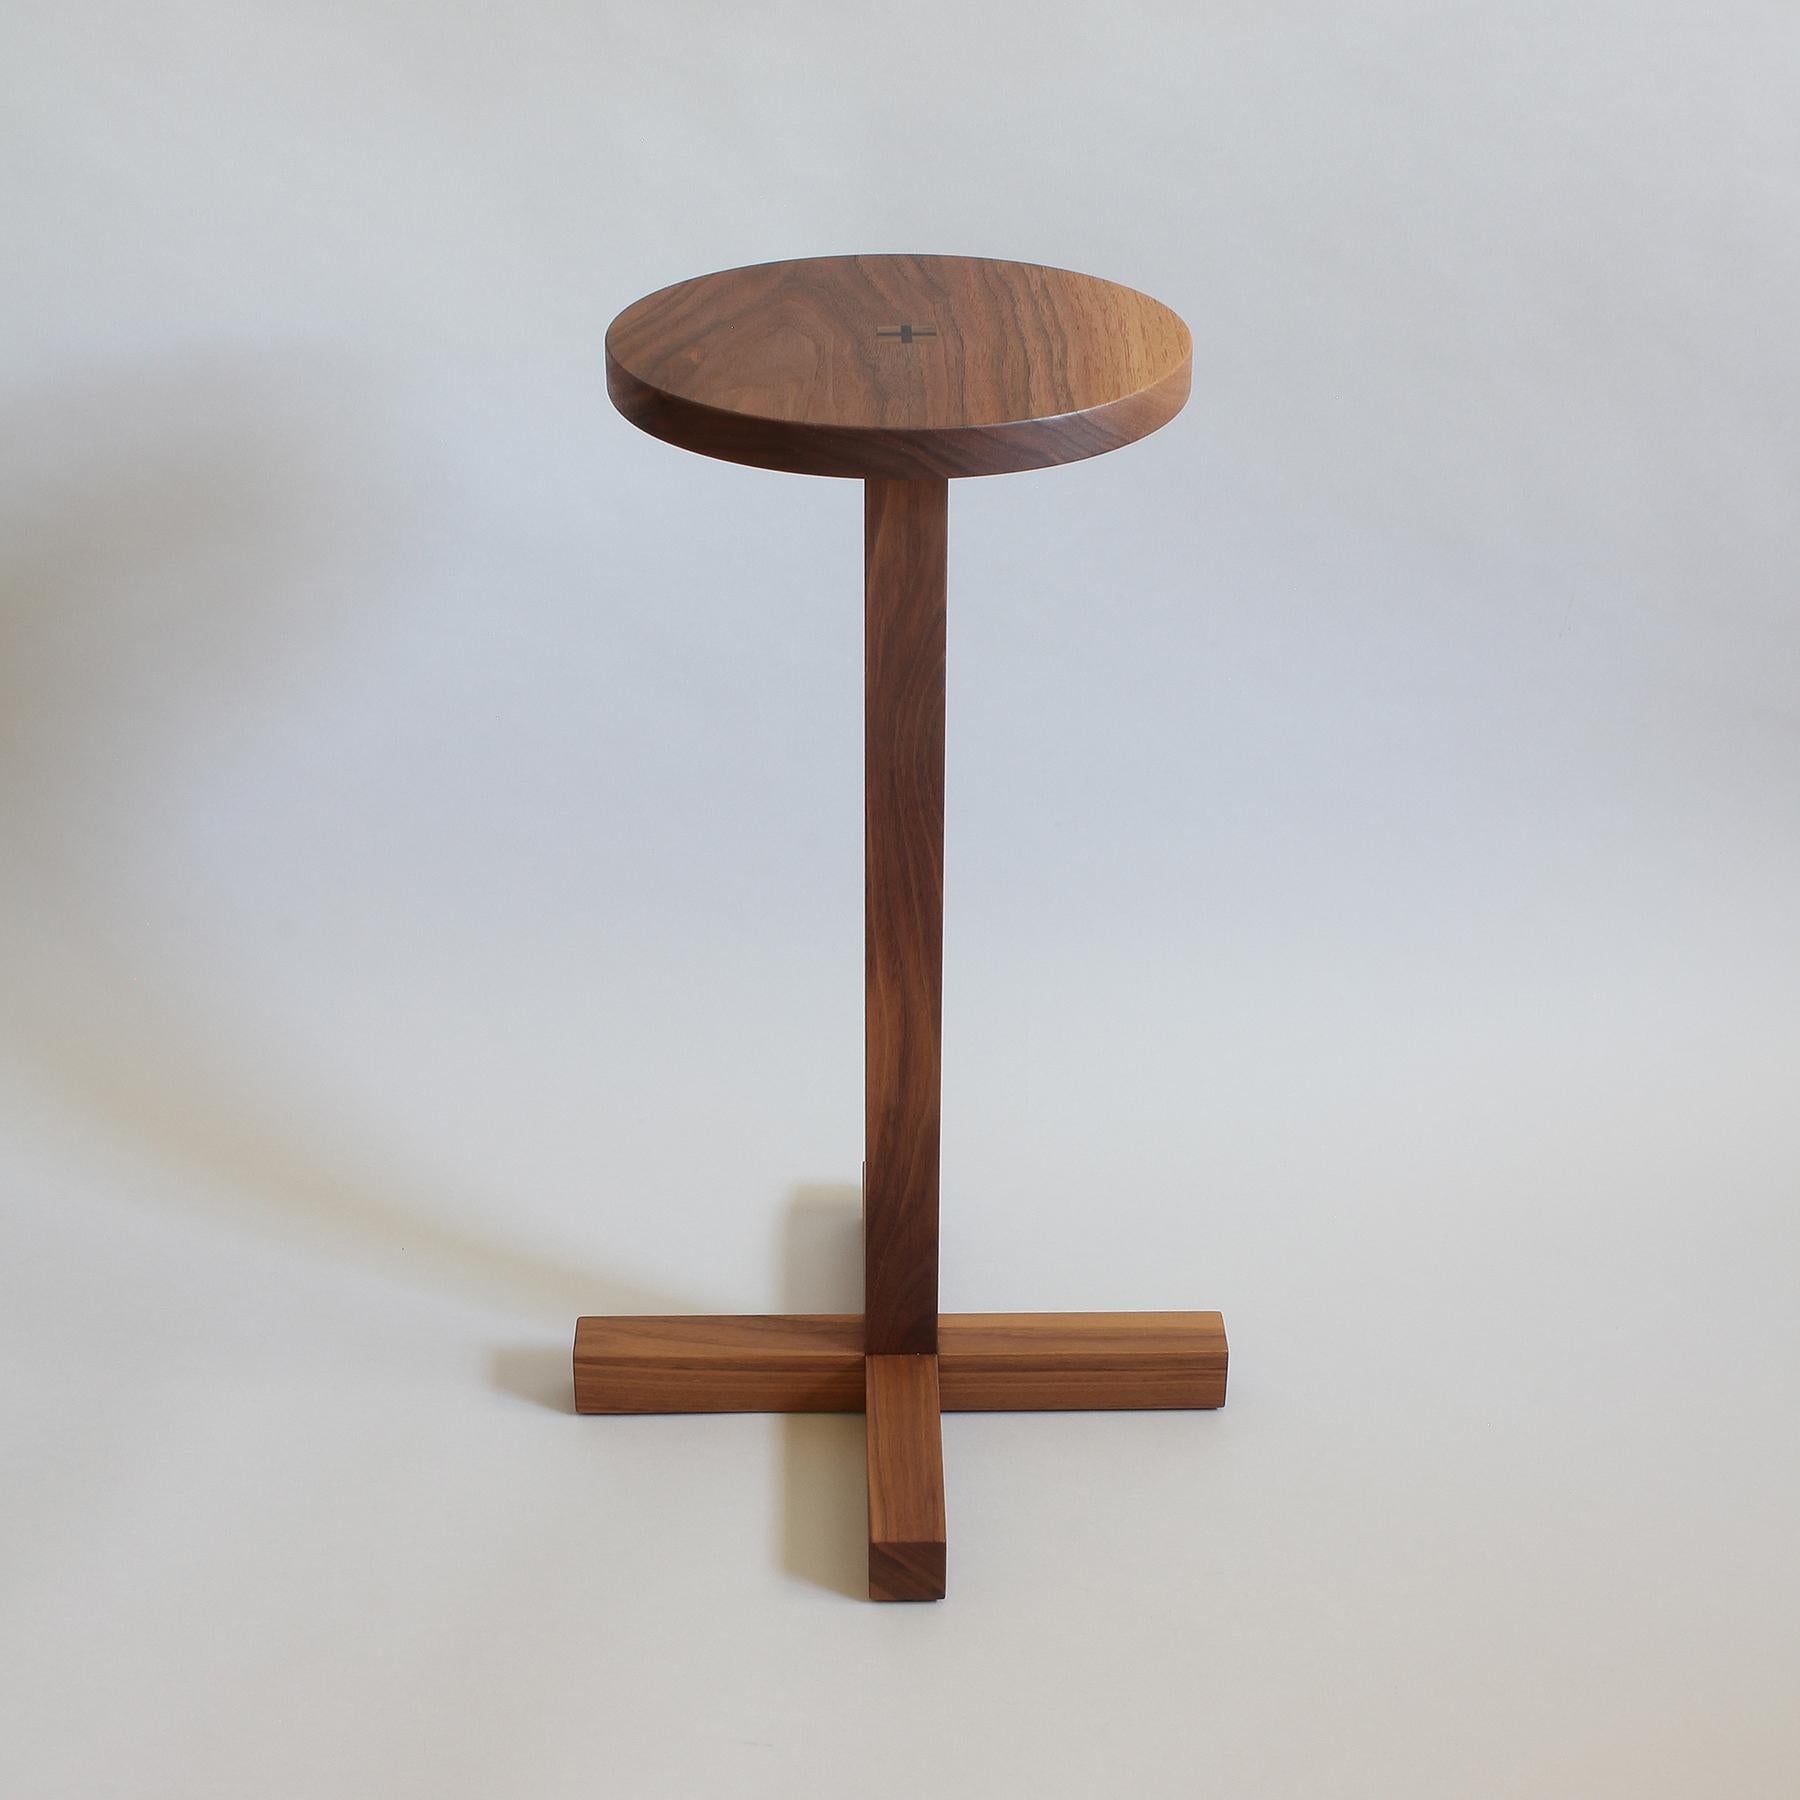 Drink Table with solid California Black Walnut top joined to a solid walnut base.  Ebony wedges are driven into place to lock the  top with the base. The base is constructed with traditional Japanese joinery for structure with no hardware, creating